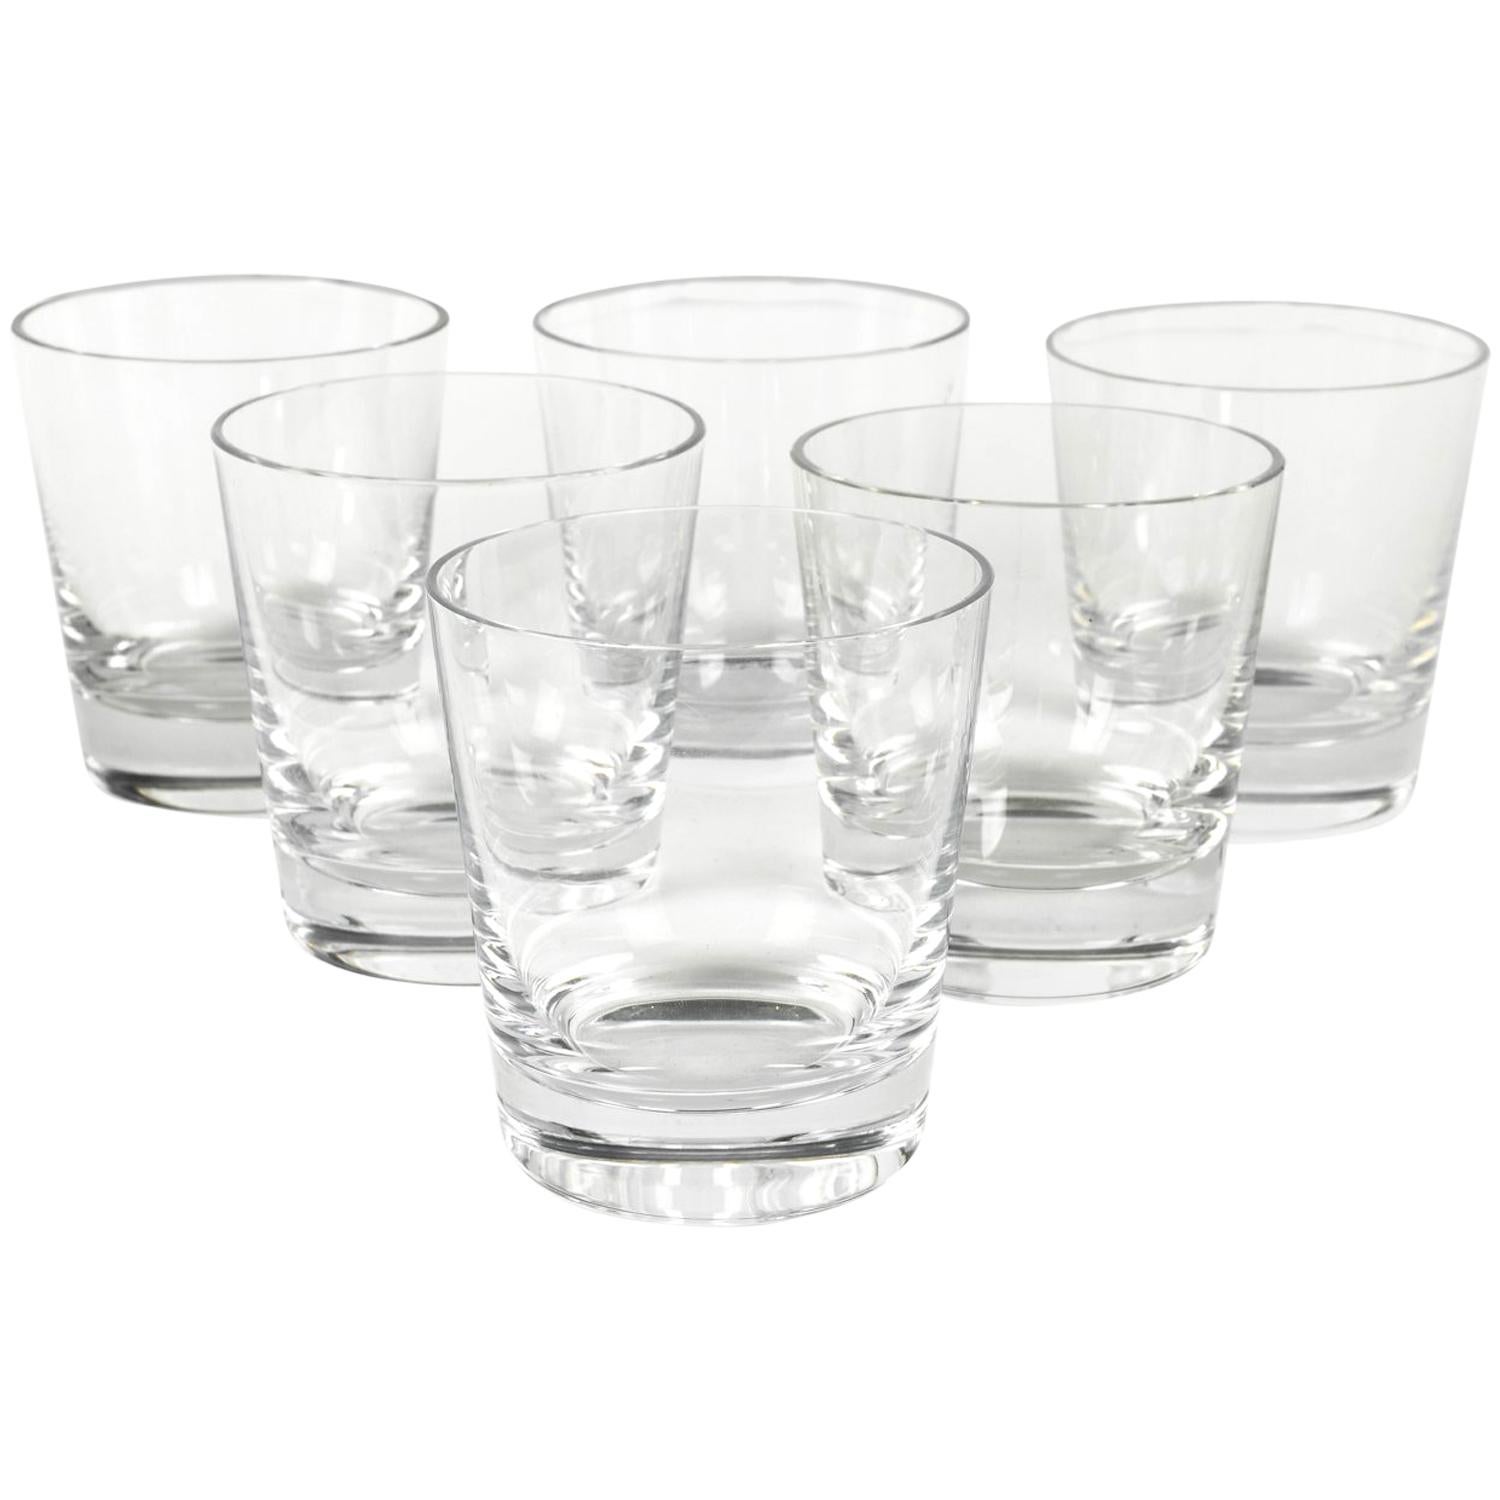 Baccarat Crystal Art Deco Style Scotch or Whiskey Barware Set